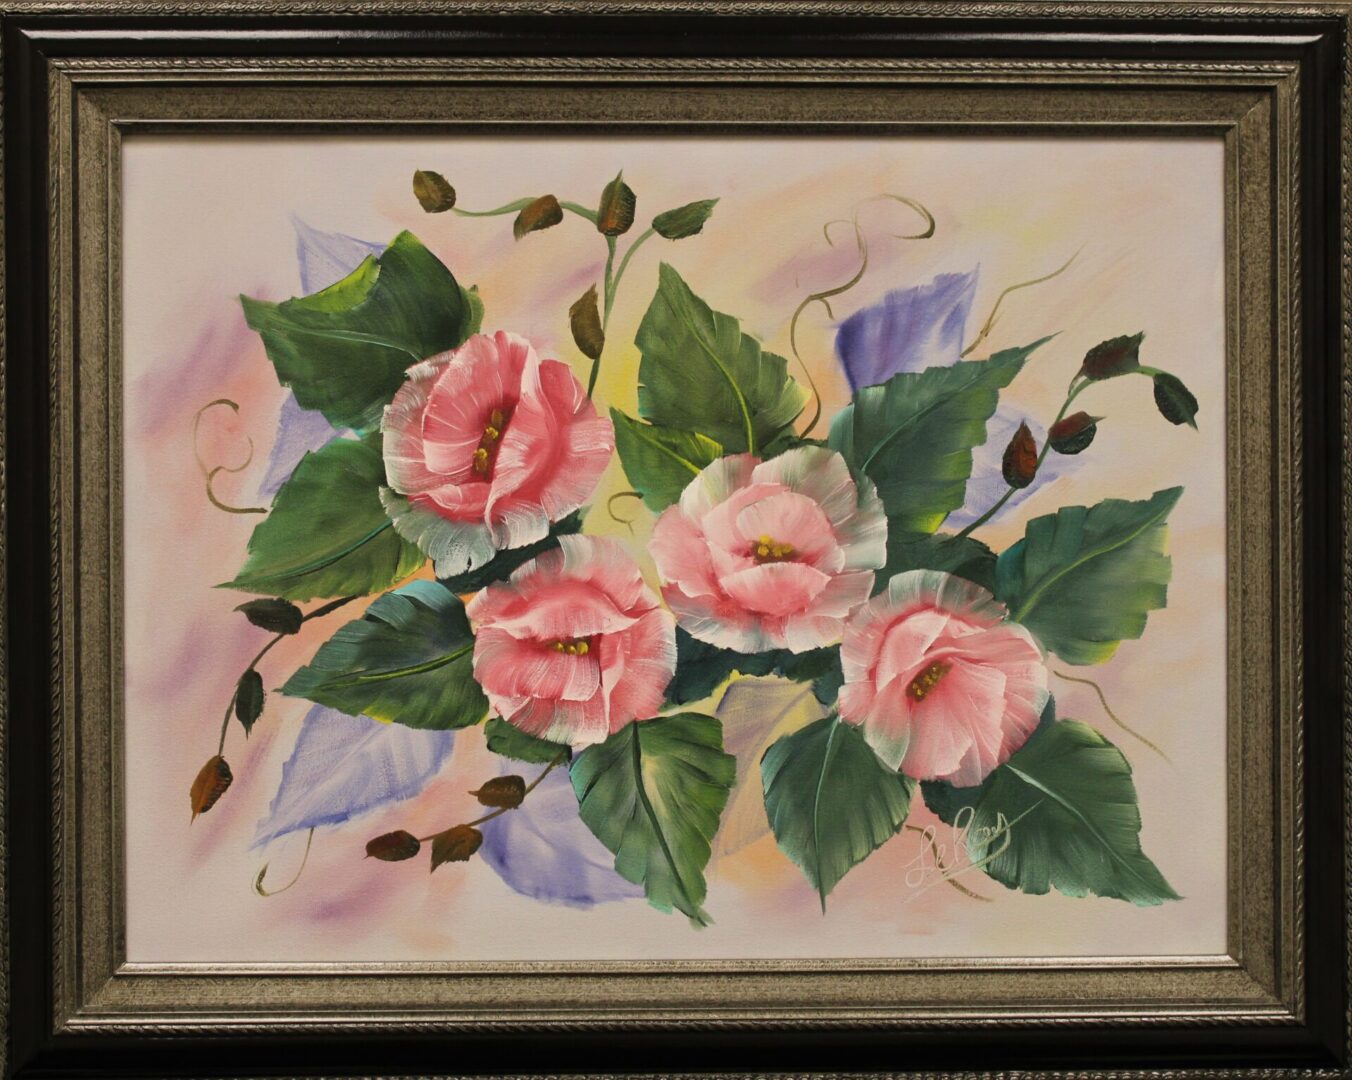 A painting of pink flowers in a frame.